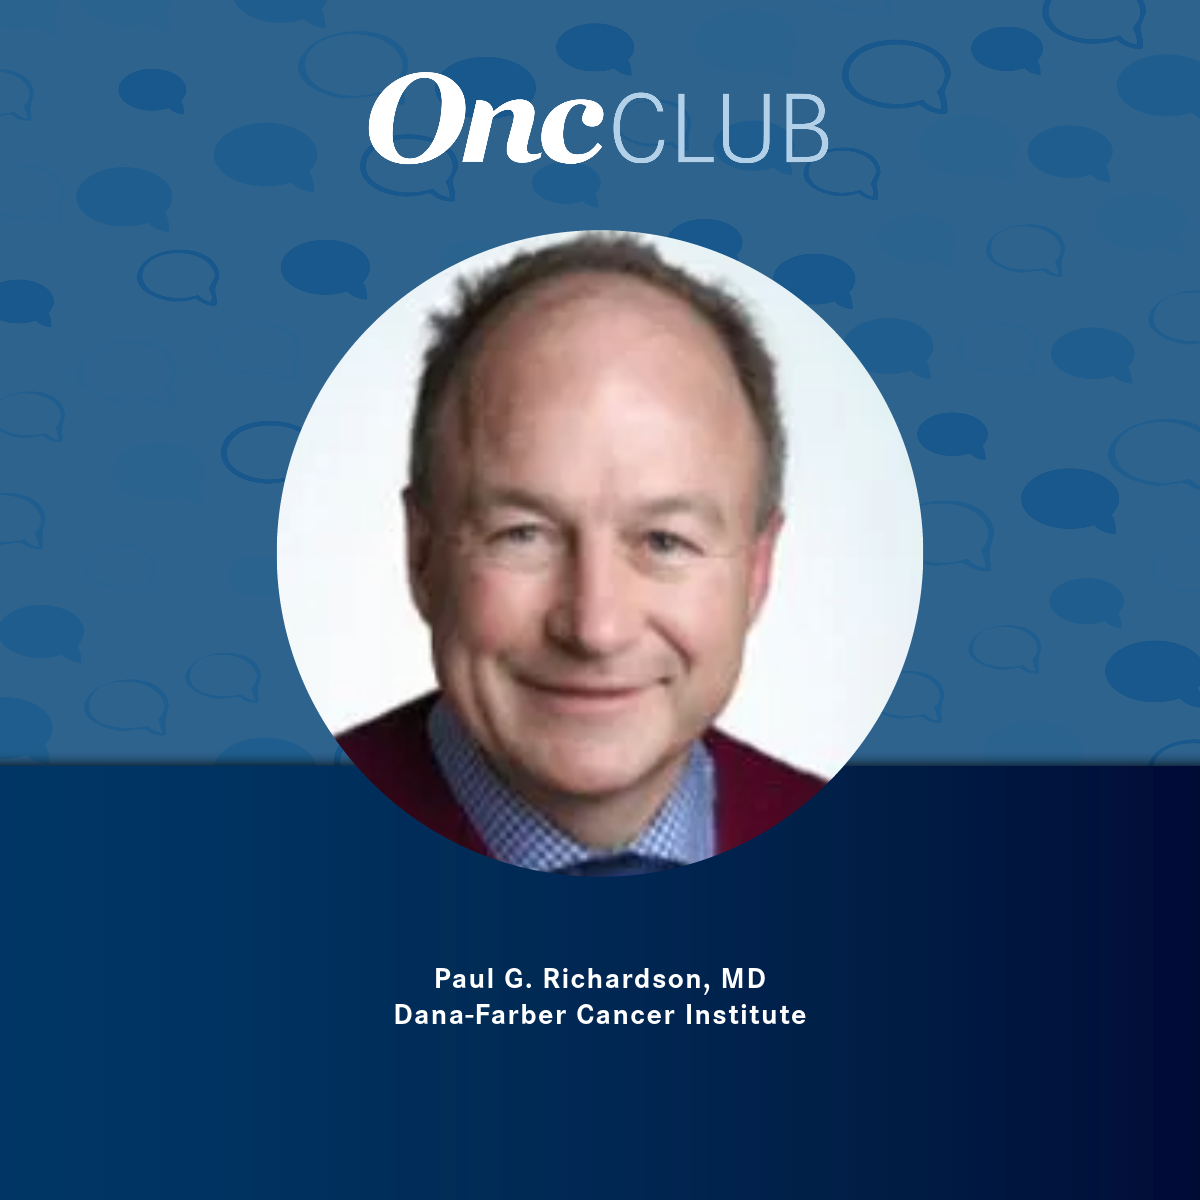 Mezigdomide Plus Dexamethasone Elicits Responses With Acceptable Safety in R/R Myeloma